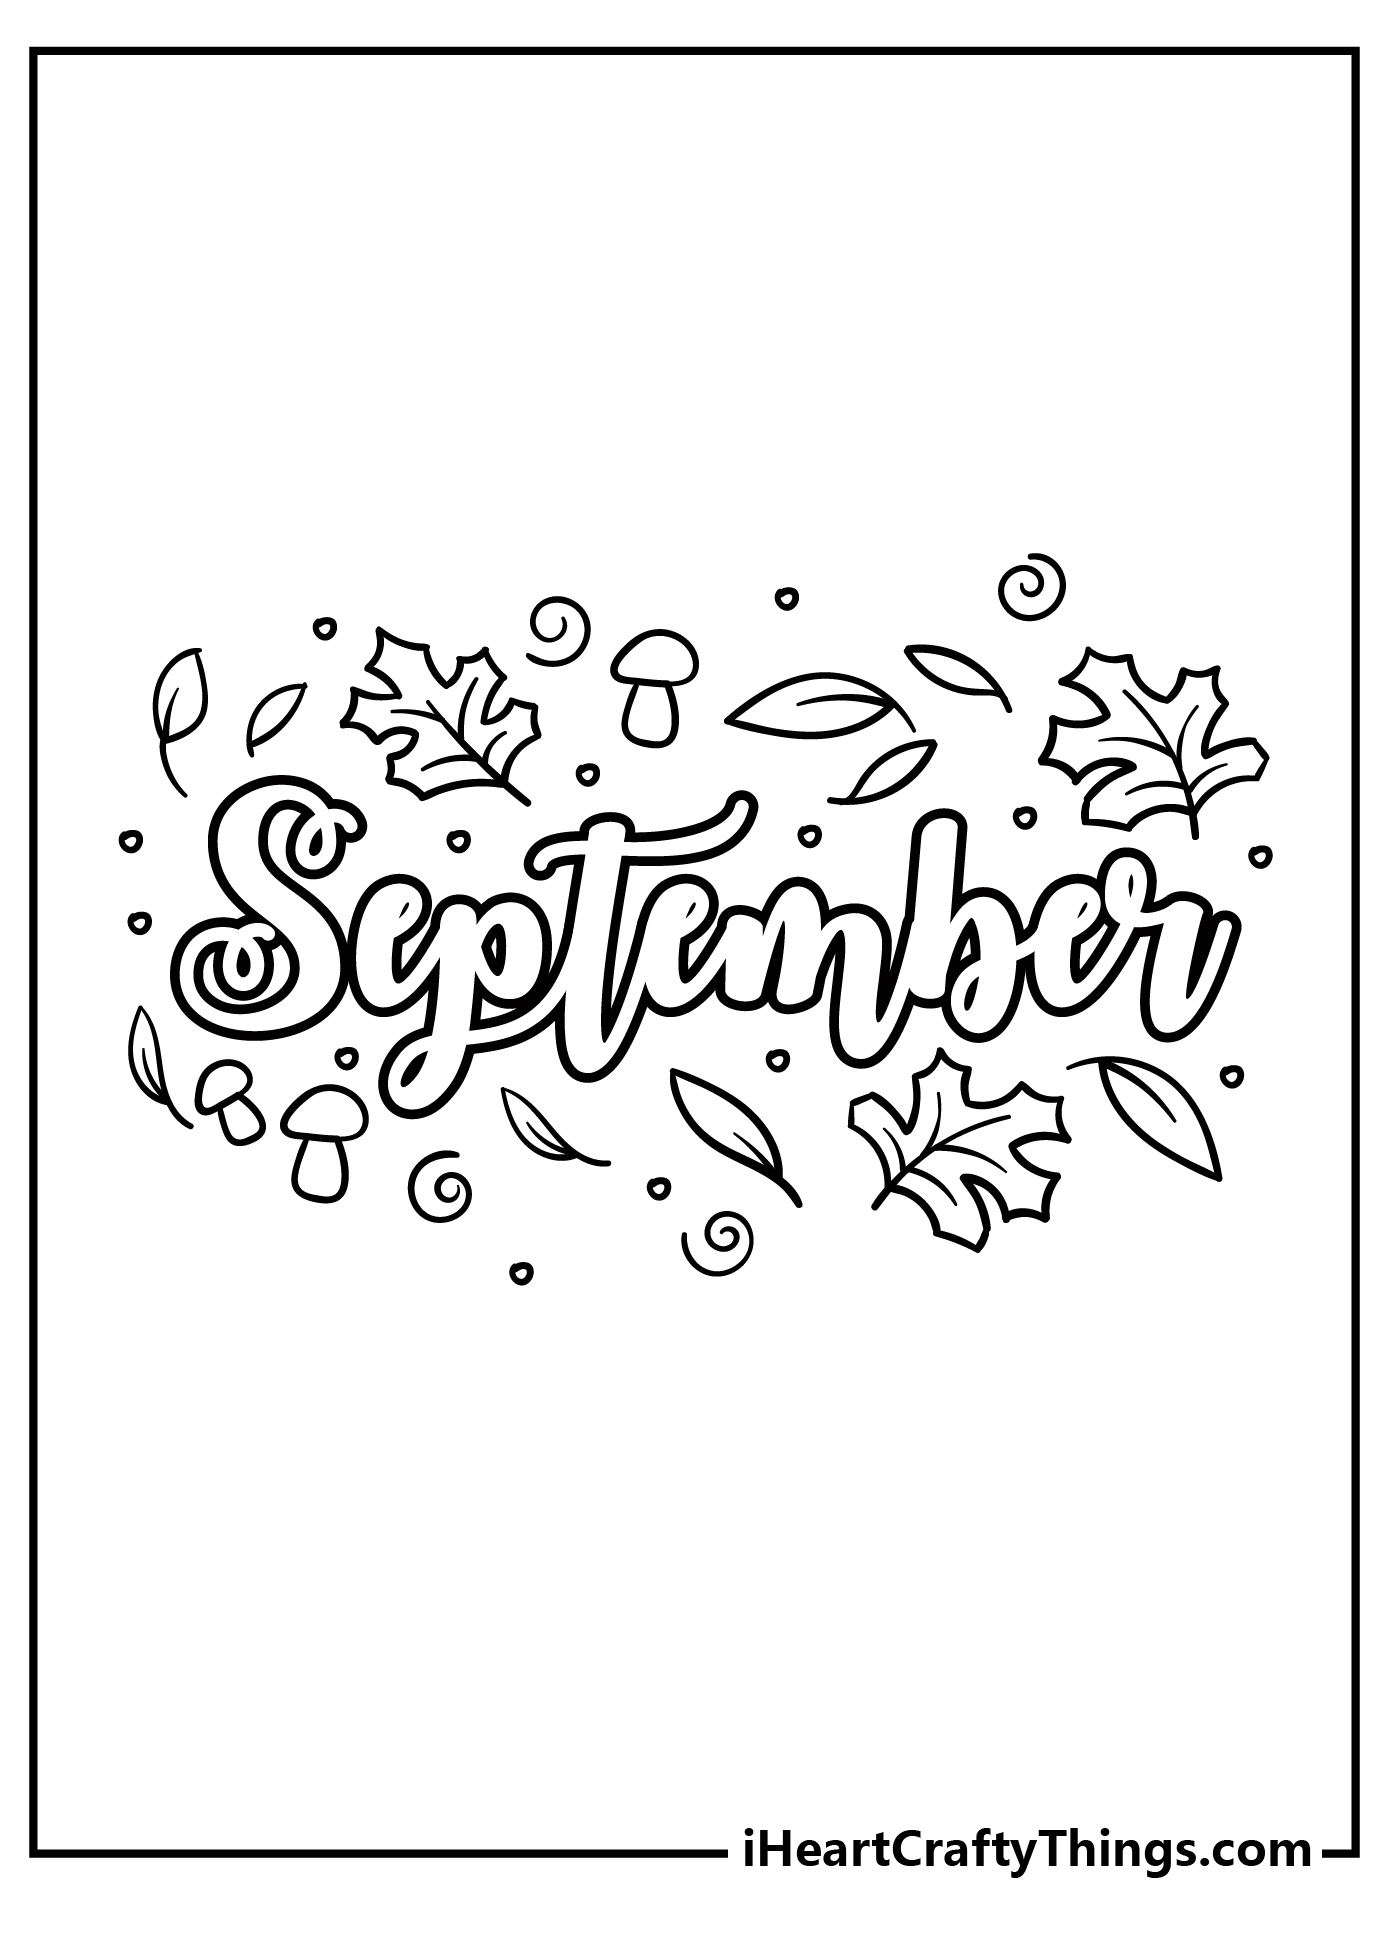 September Coloring Pages for preschoolers free printable